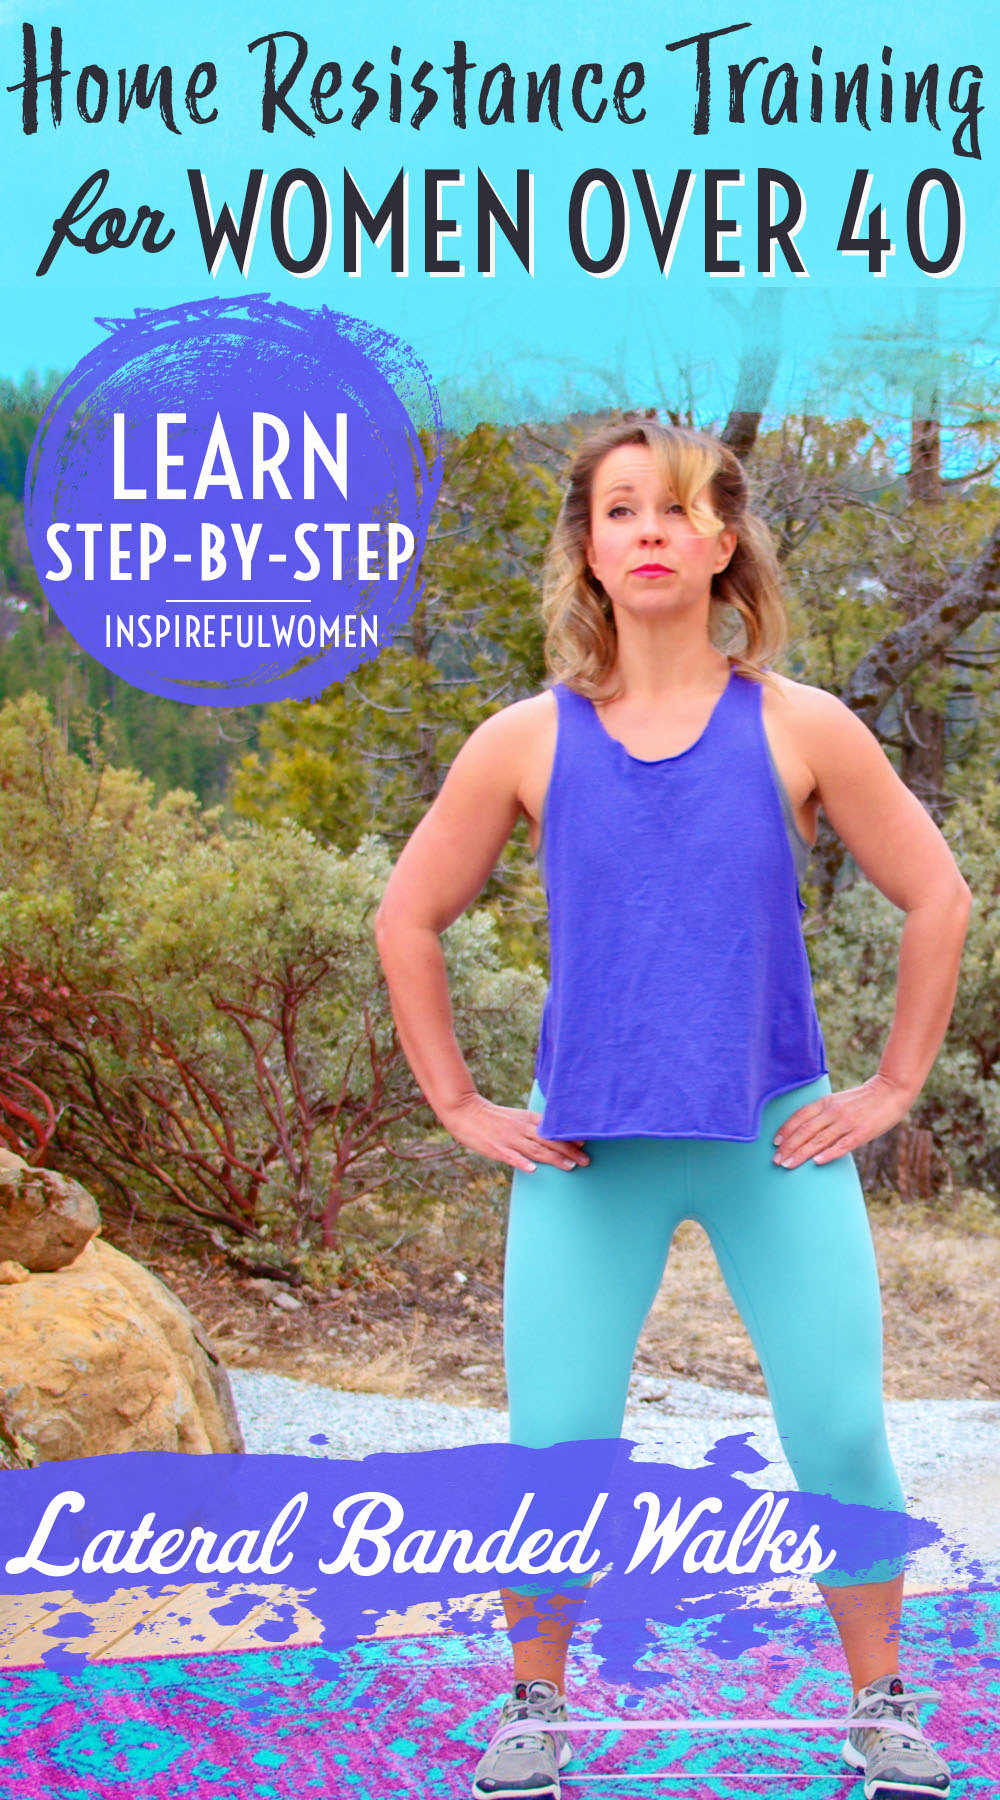 lateral-banded-walks-learn-at-home-glutes-exercise-for-women-40+